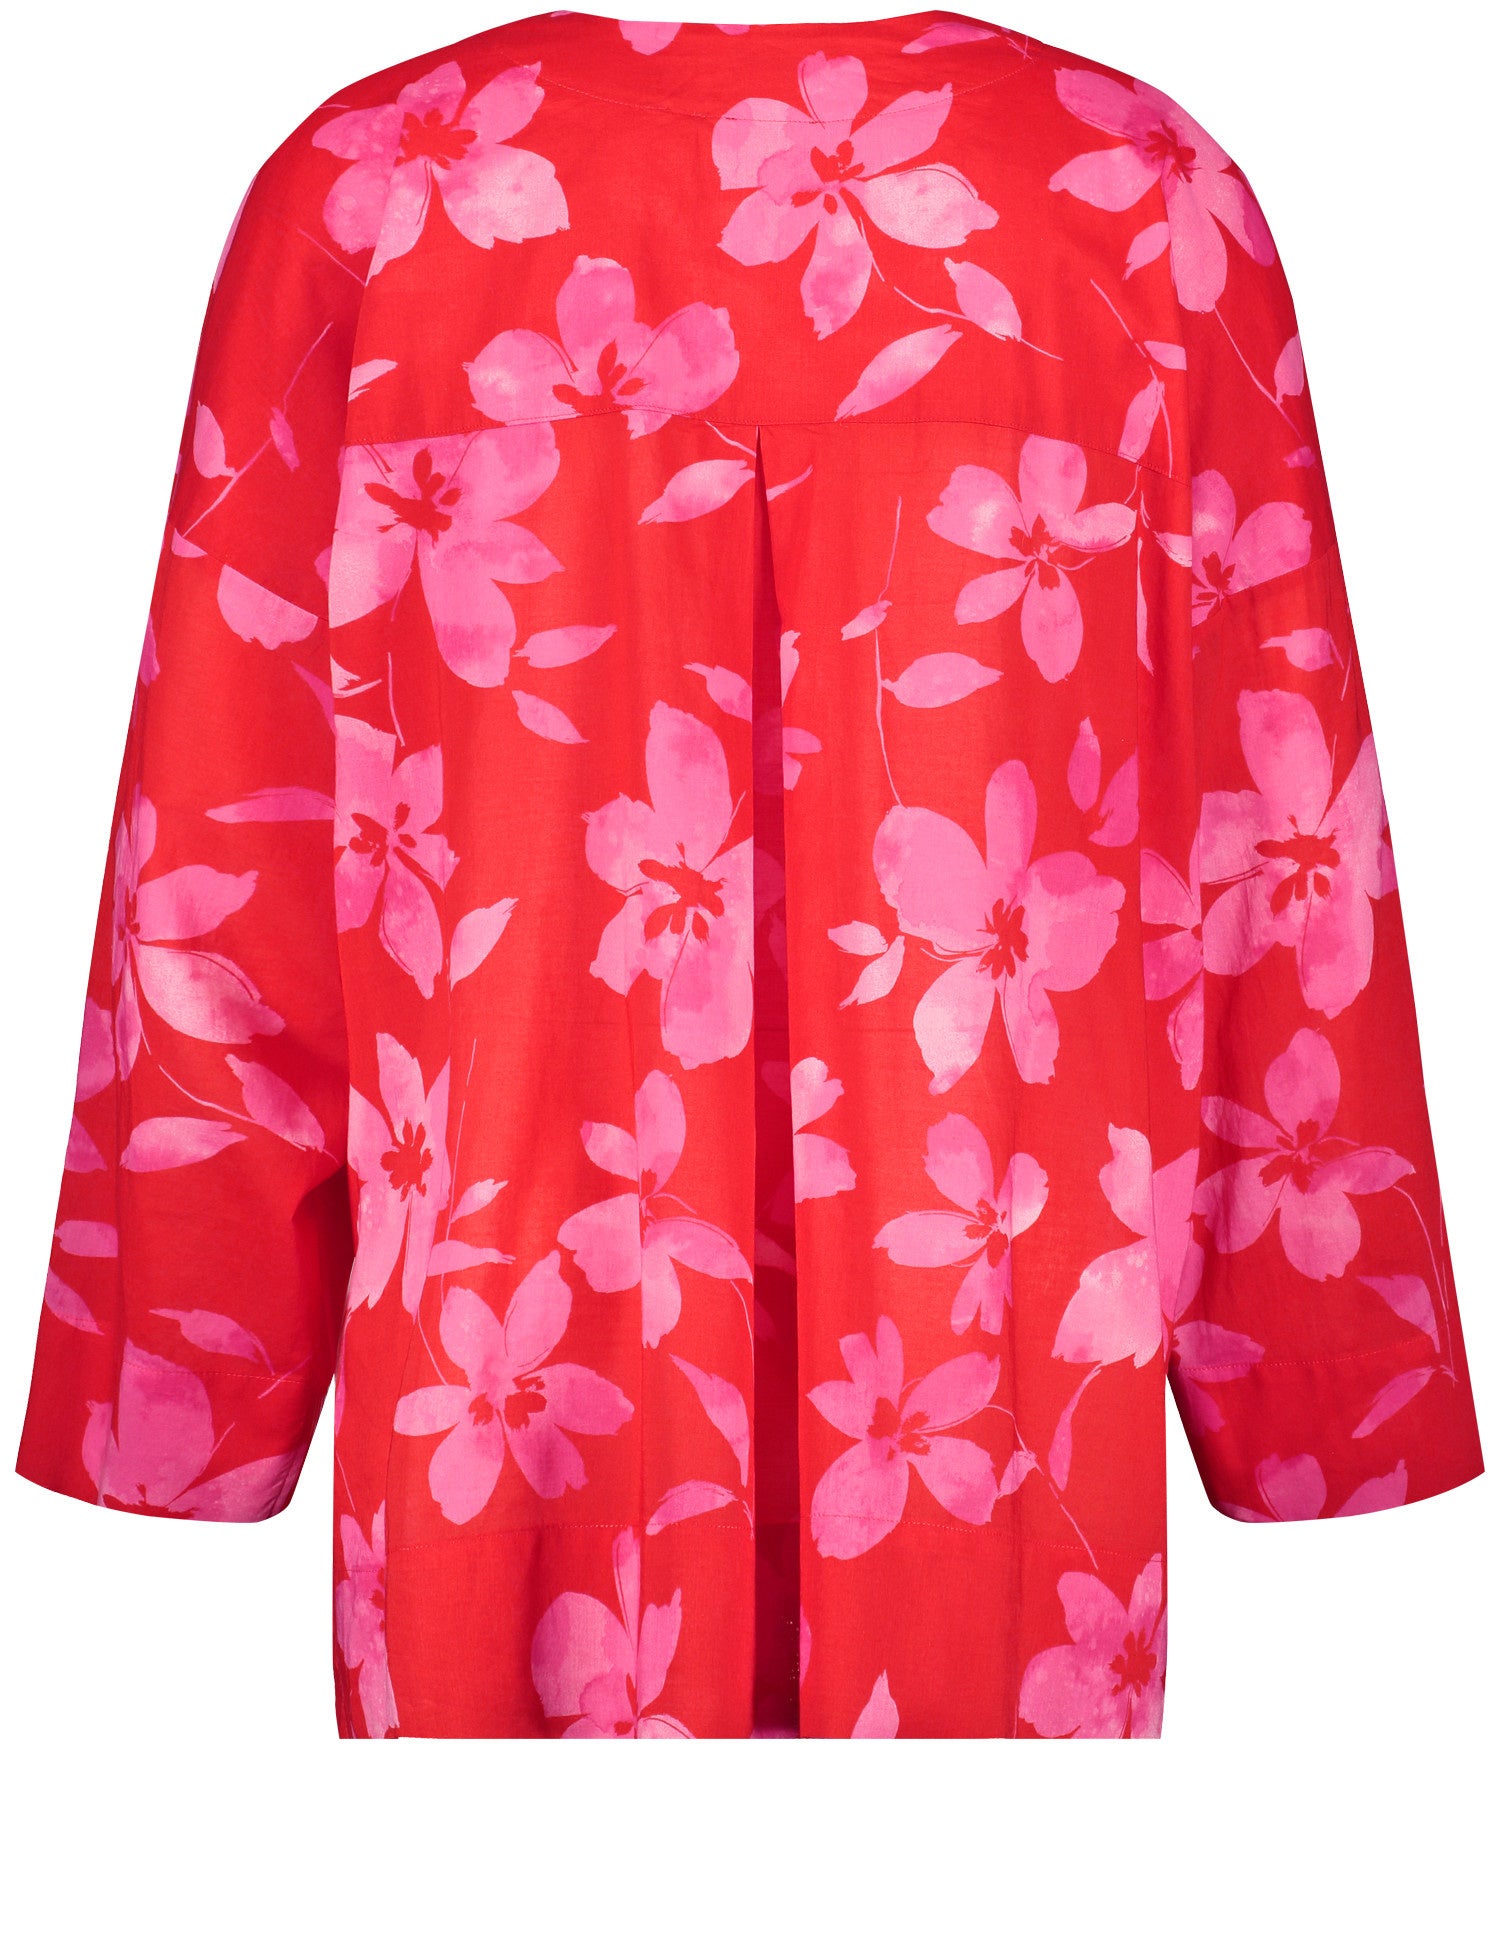 Cotton Blouse With Large Flowers